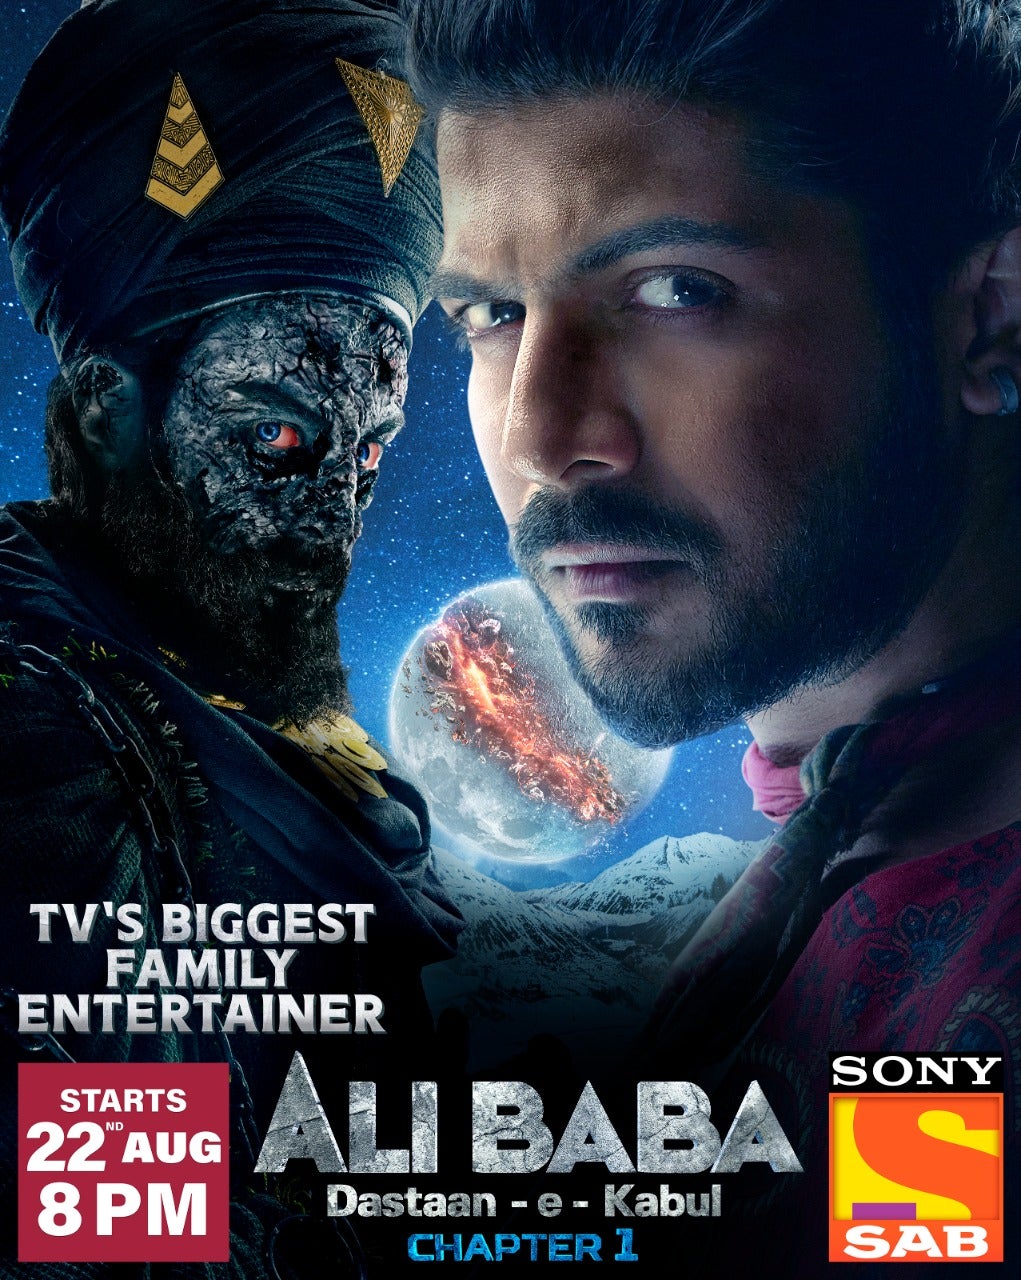 TV ratings for Alibaba: Dastaan-E-Kabul in Argentina. Sony SAB TV series